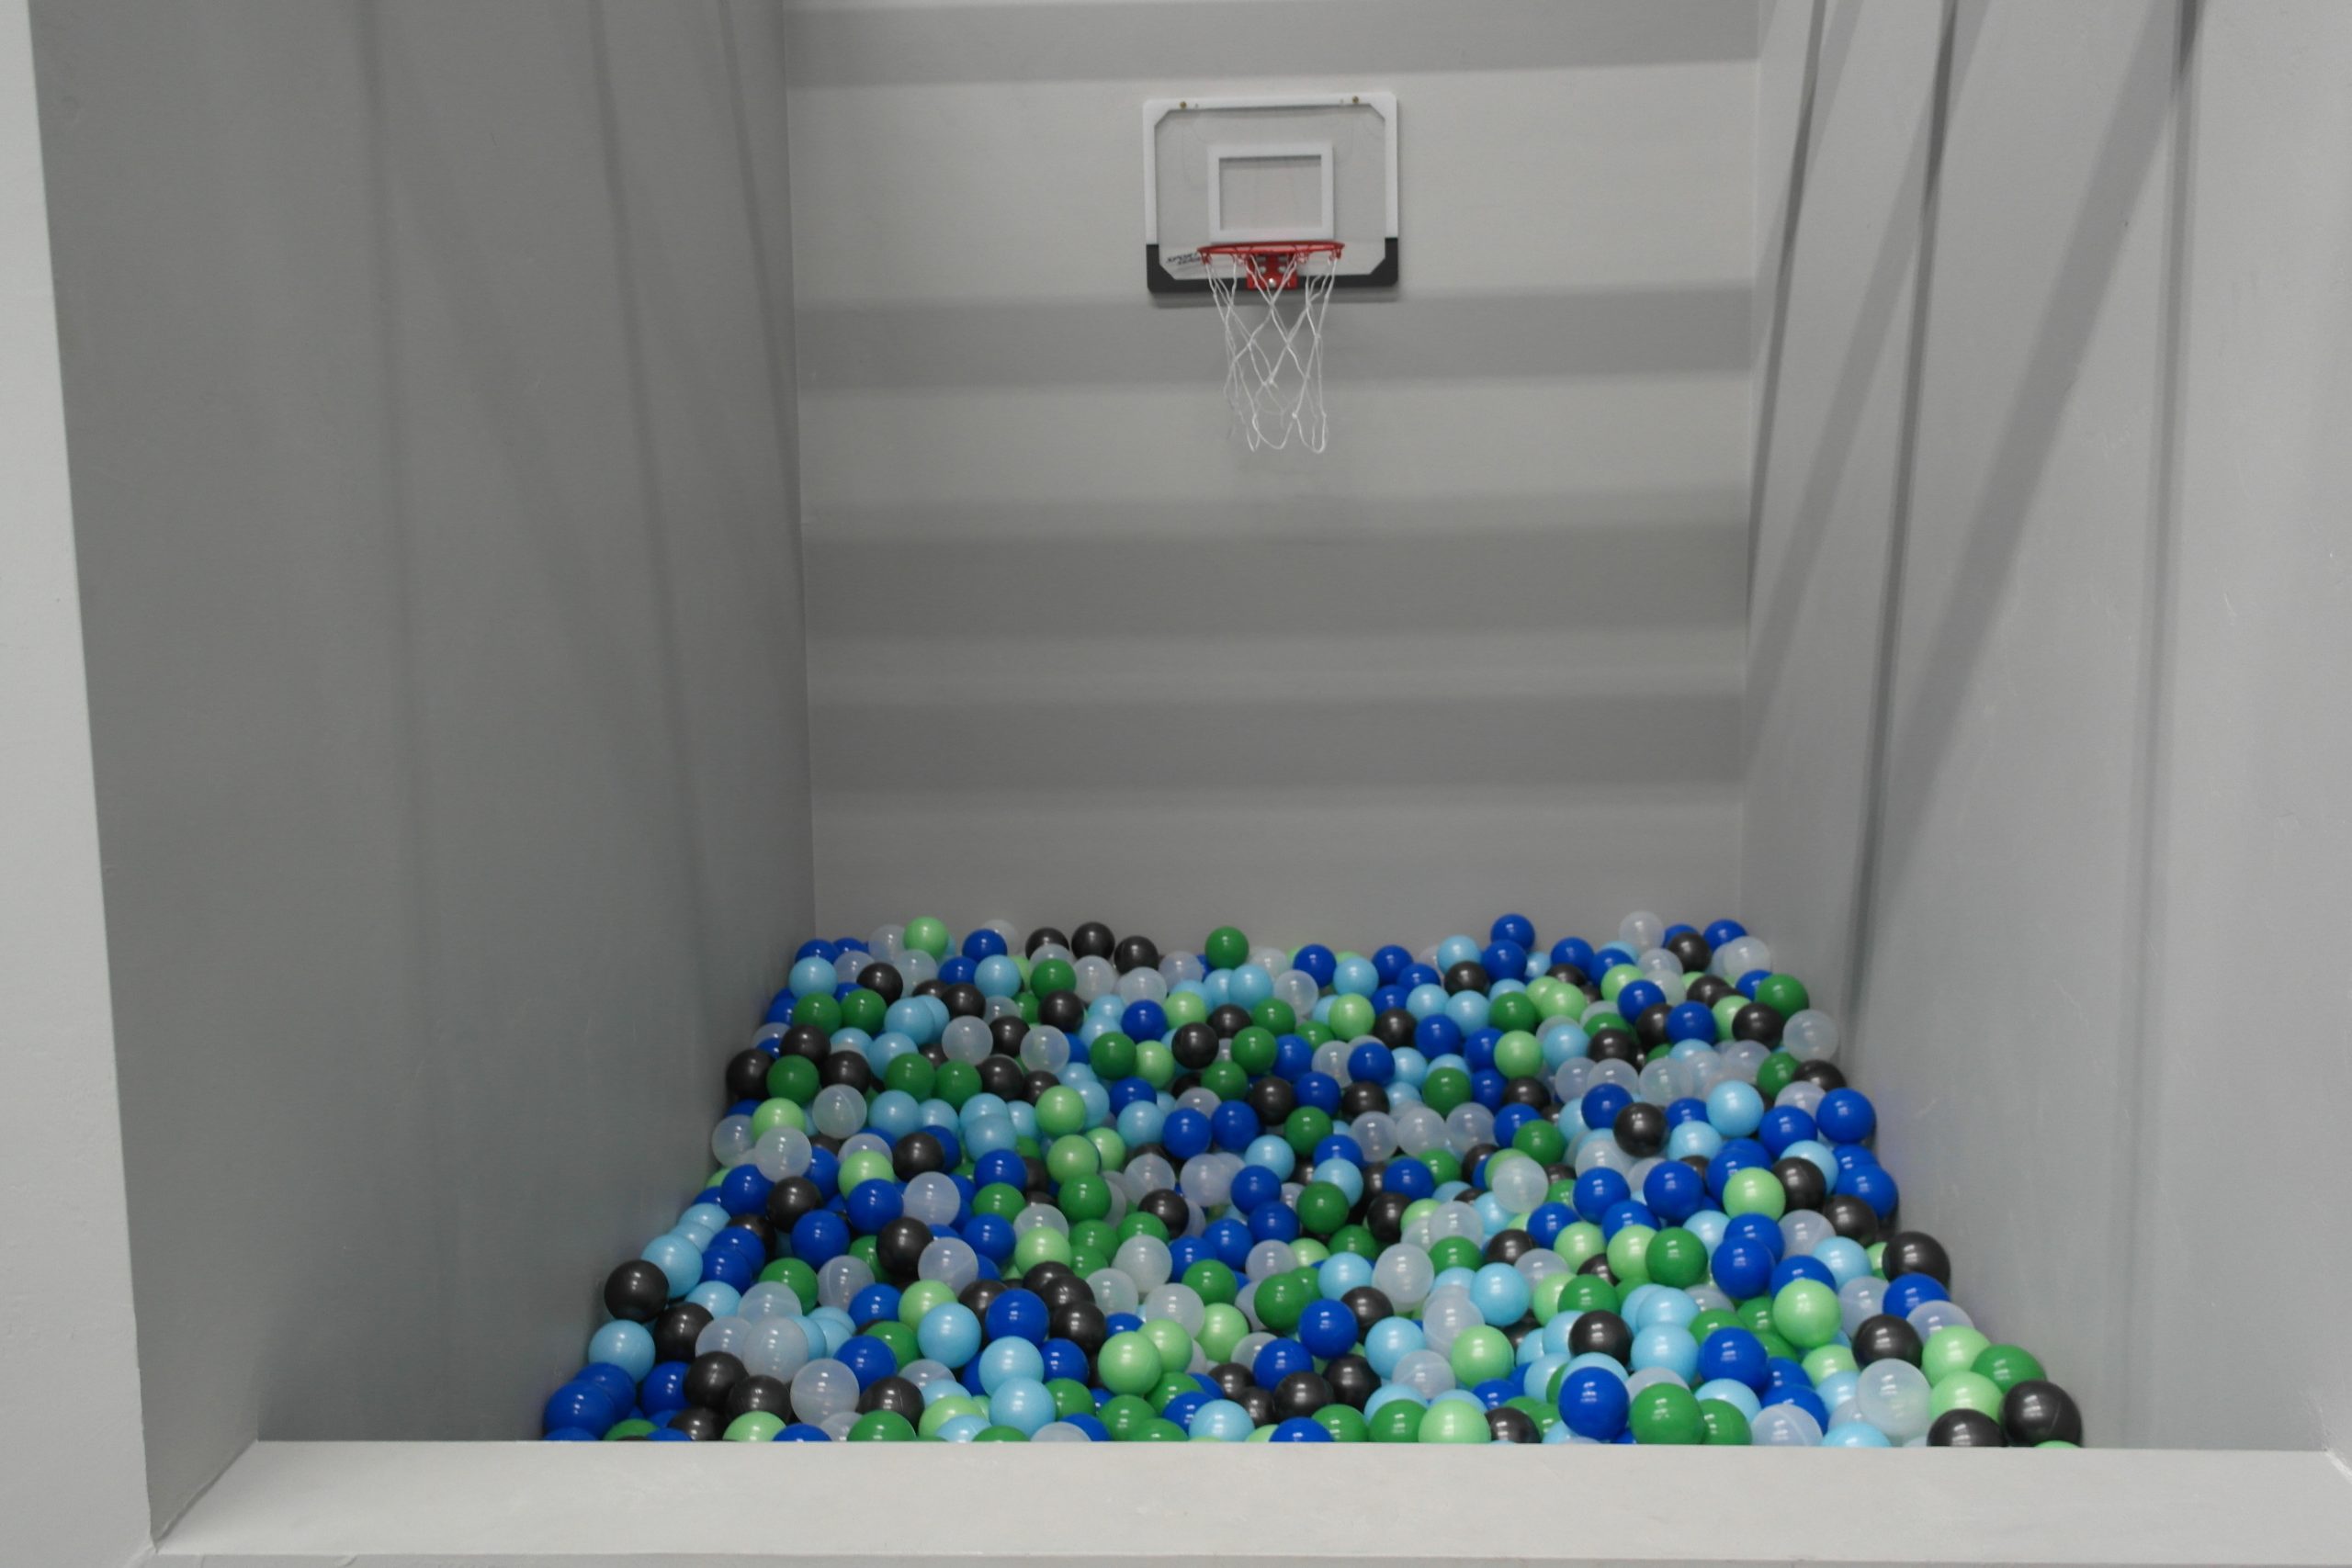 8ftx5ft clean ball pit!